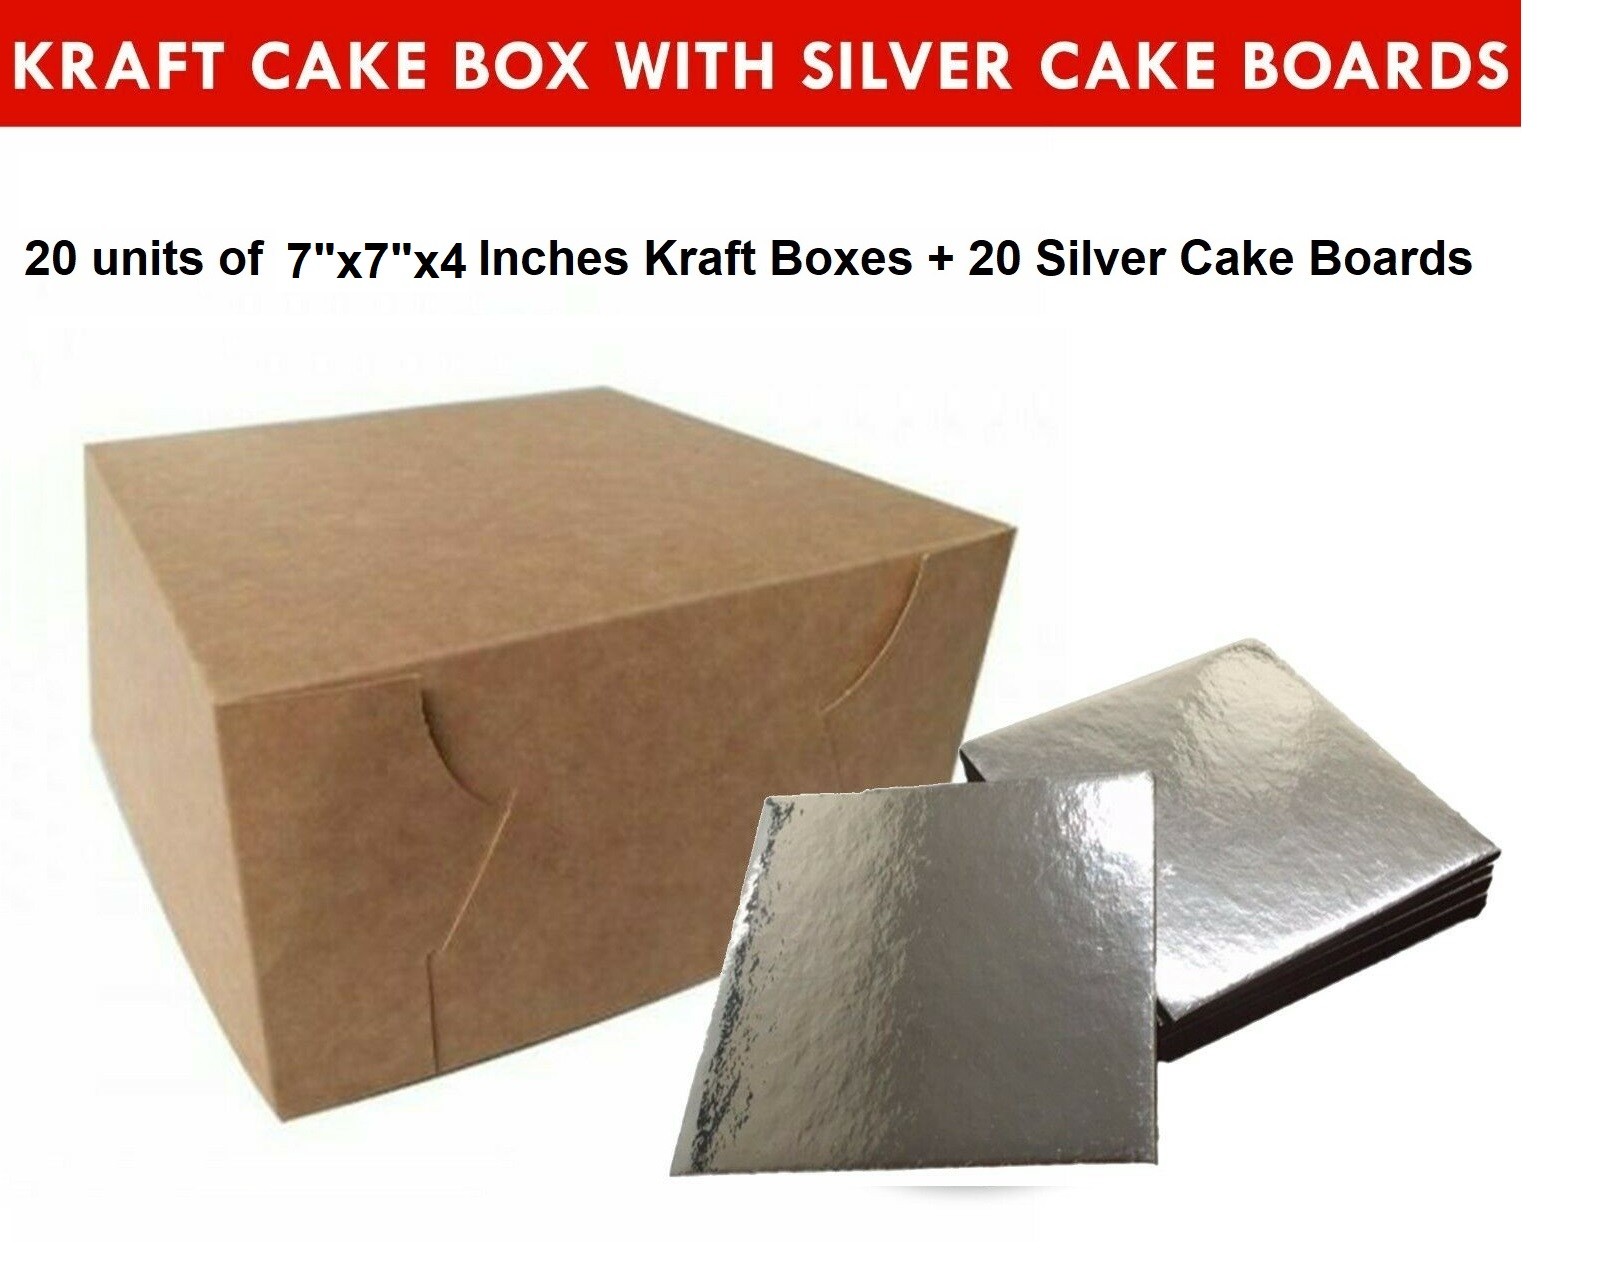 Kraft Cake Boxes with Square boards - 7" x 7" x 4" ($3.5 /pc x 20 units)